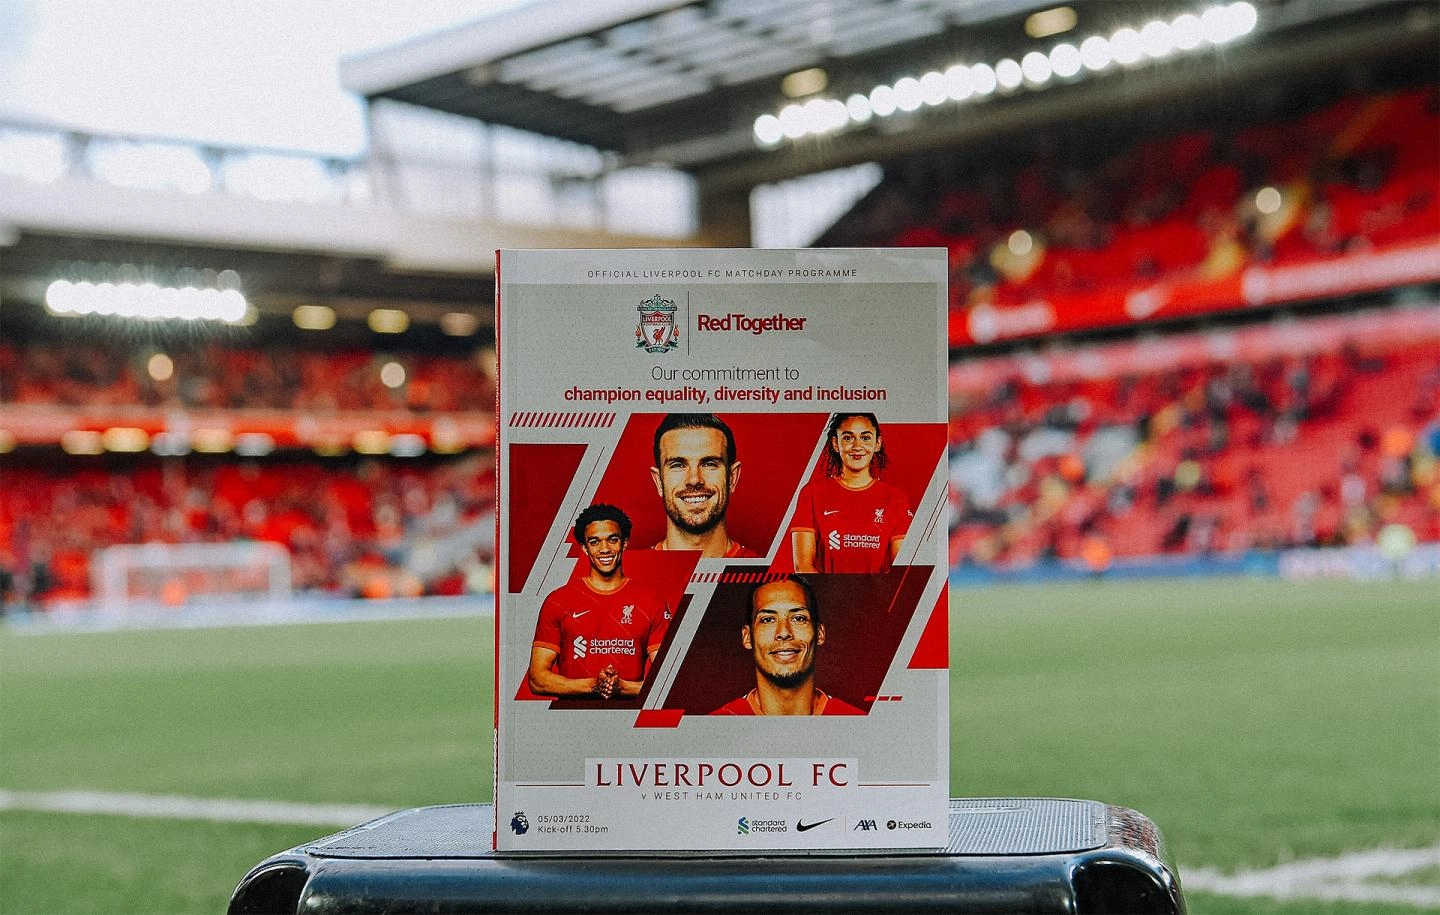 The cover of the programme for last season's Red Together fixture